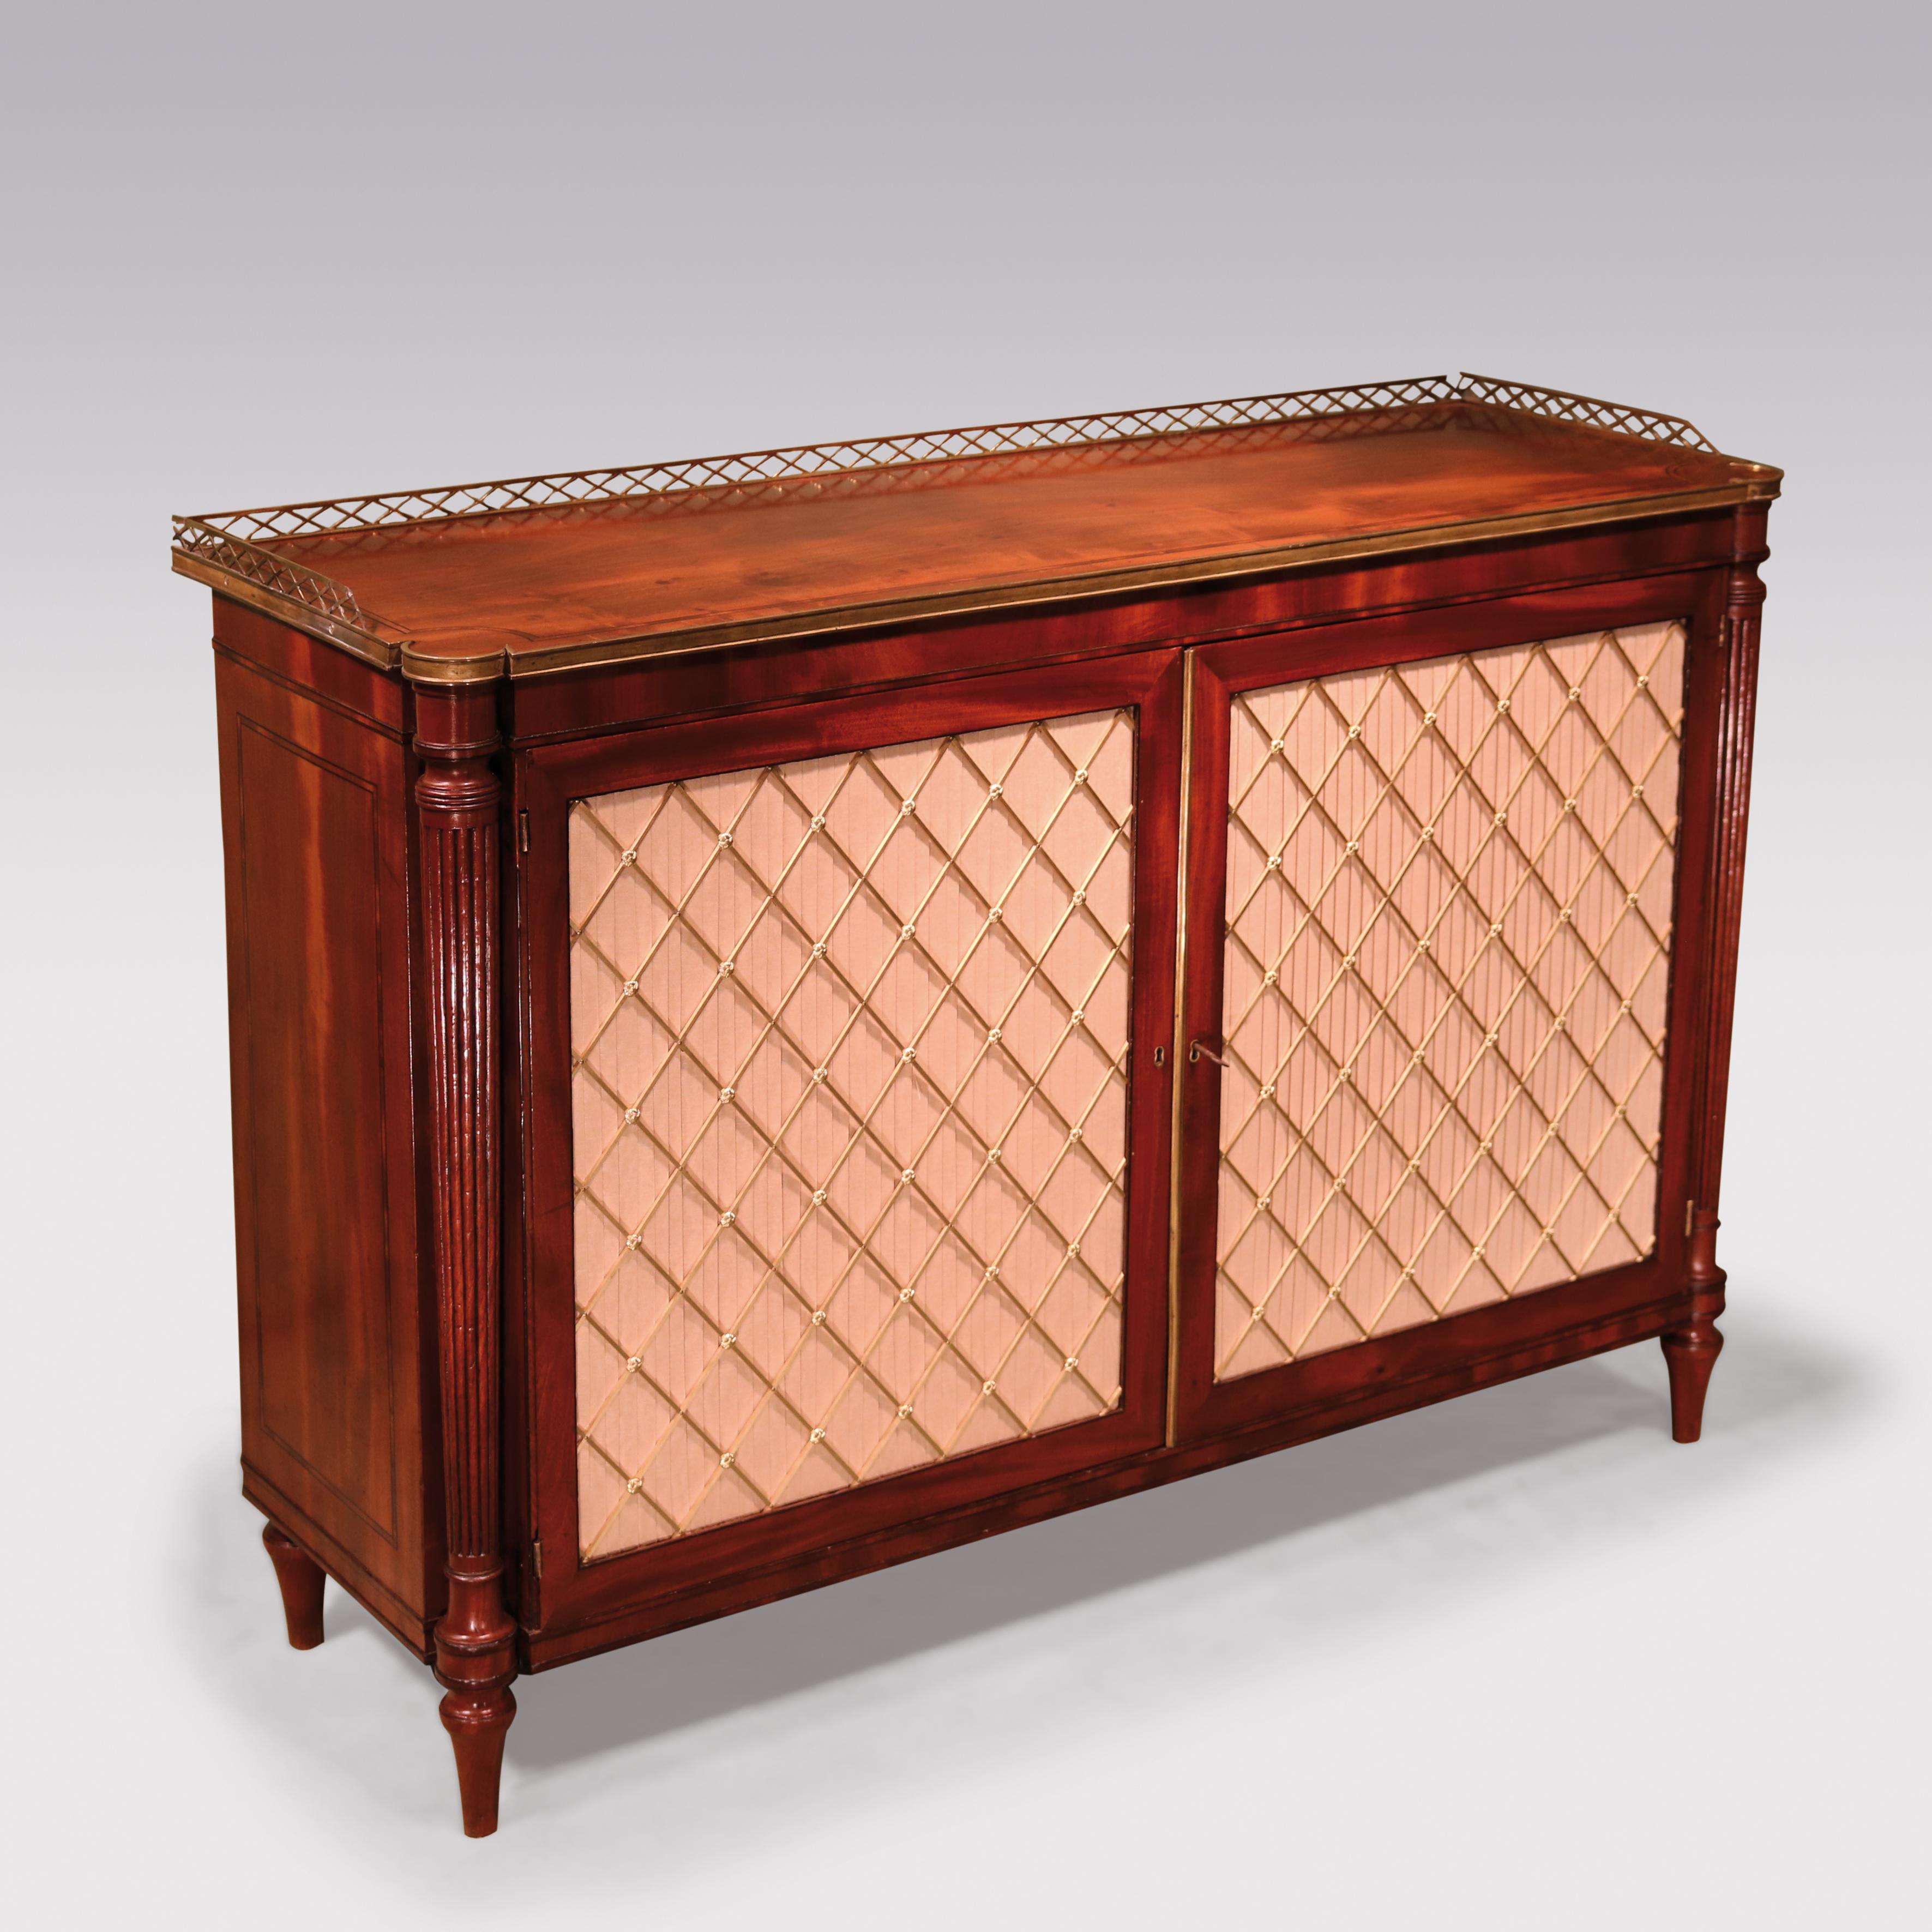 A fine early 19th century Regency period Mahogany 2 door cabinet having crossbanded and brass galleried rectangular lobed top with brass edging above brass grille pleated panelled doors flanked by turned reeded columns. The Cabinet with crossbanded